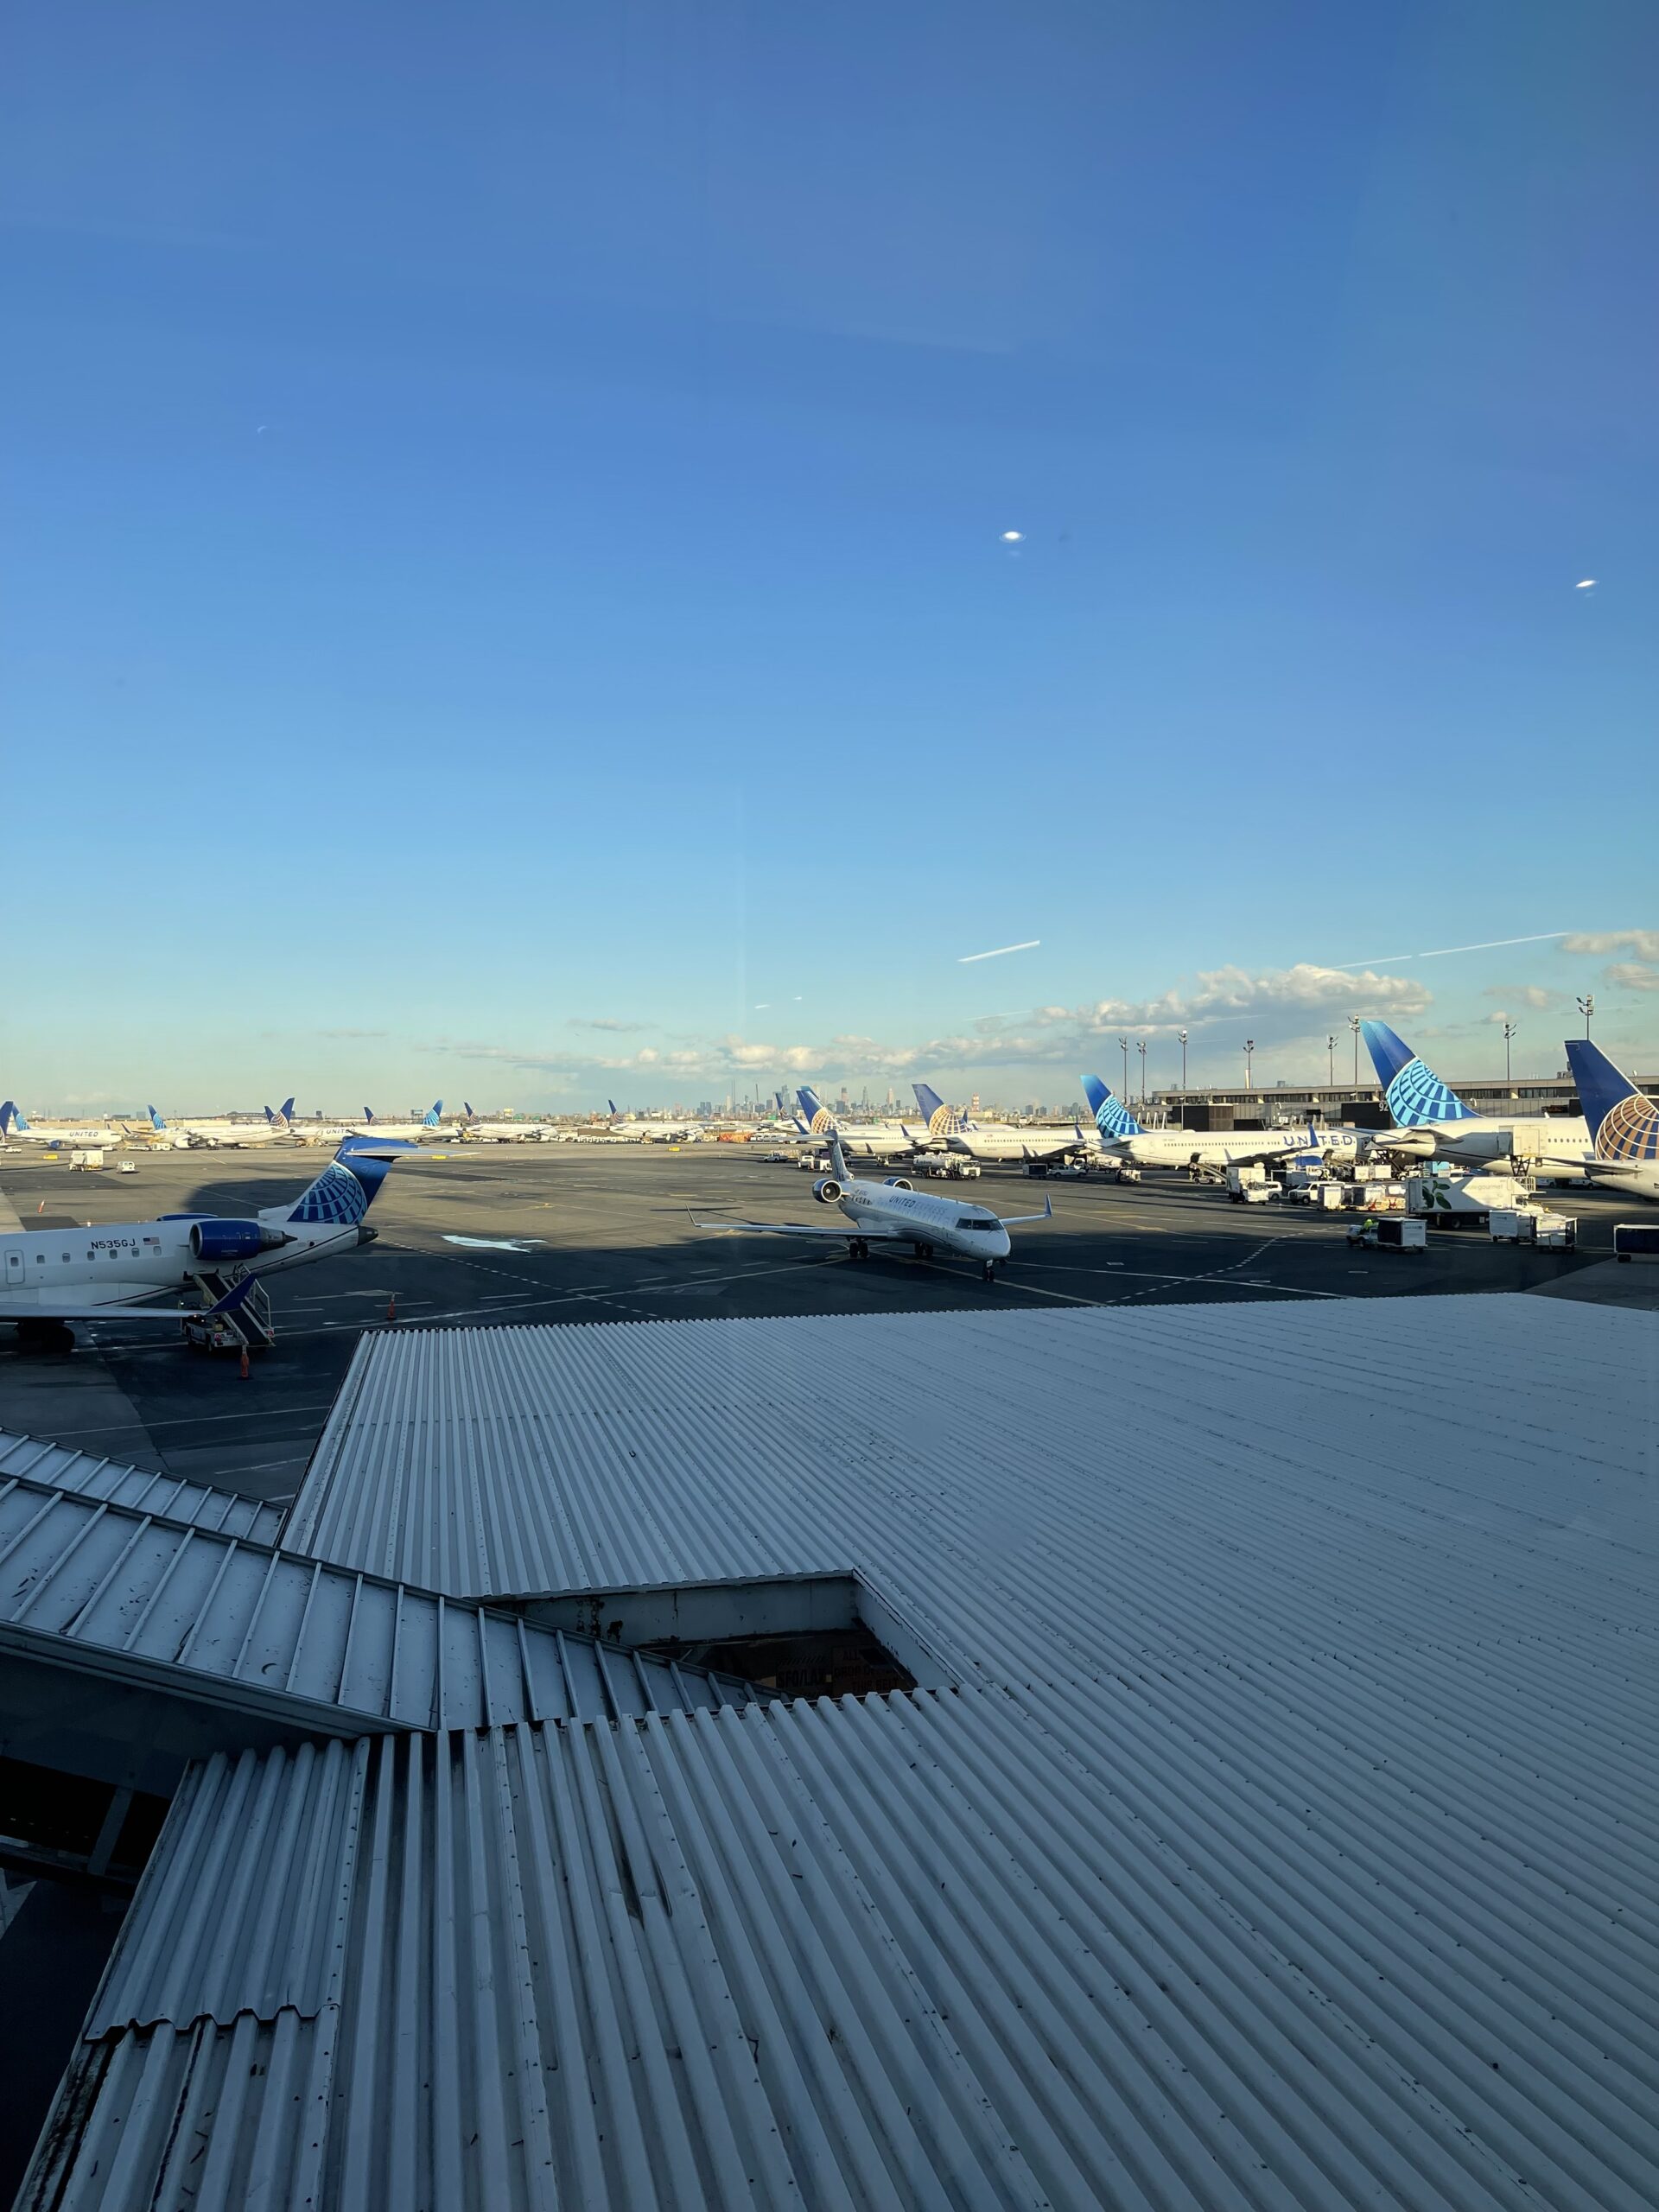 airplanes on the tarmac